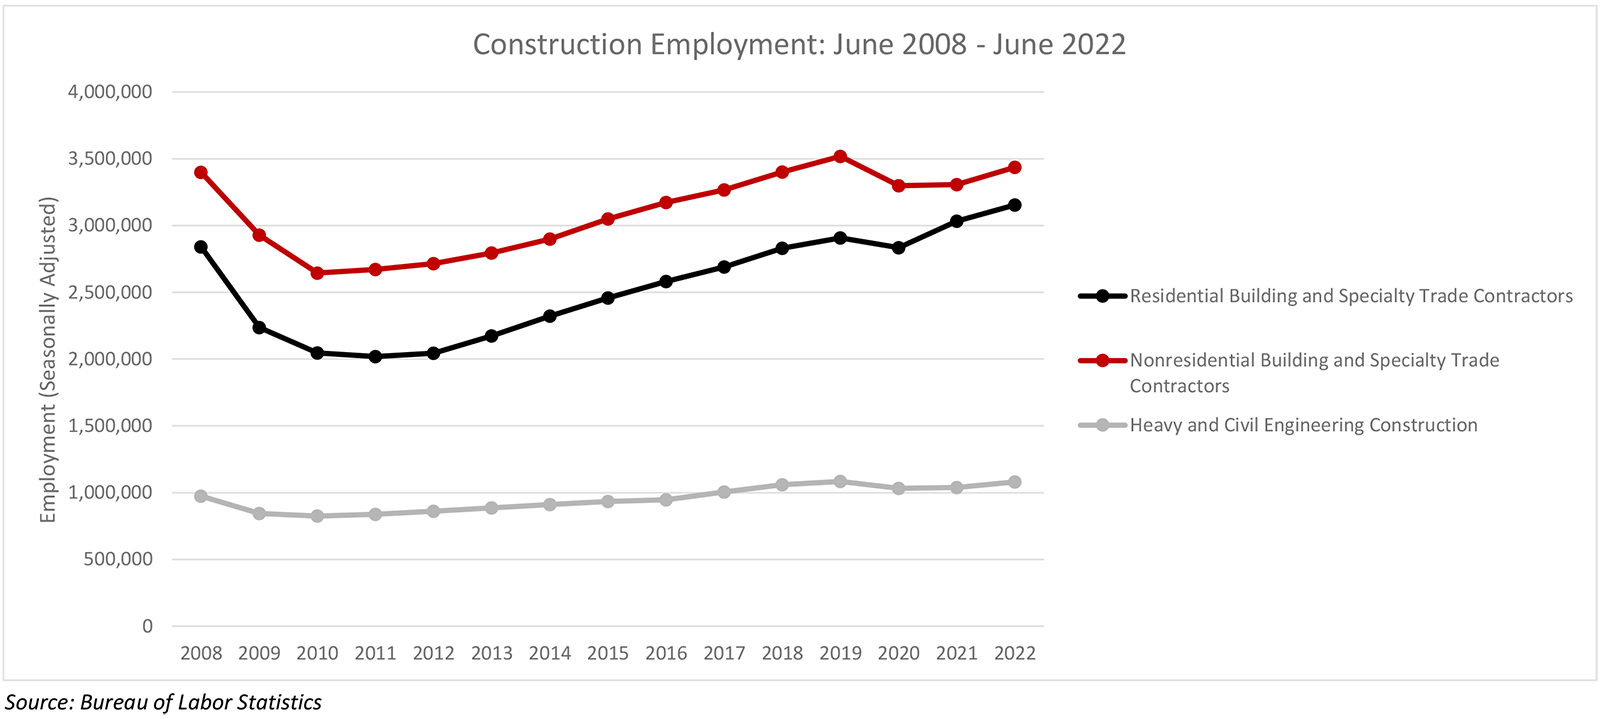 Nonresidential Construction Adds 16,500 Jobs in June